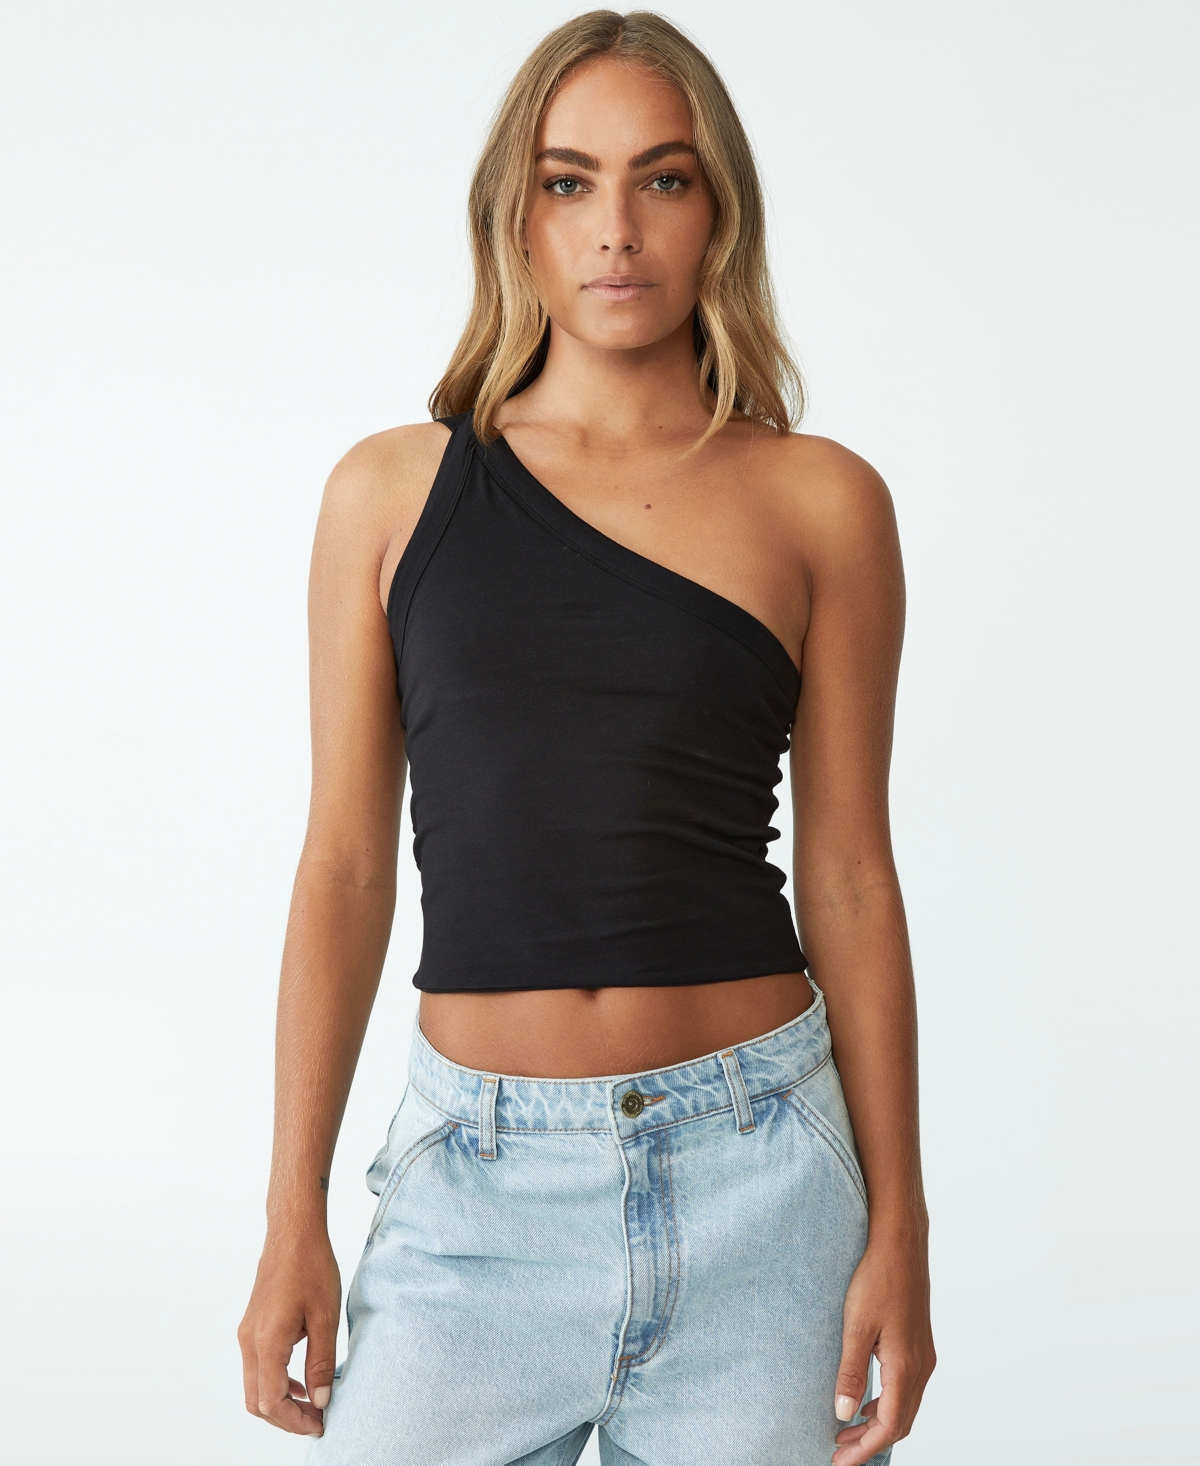 Cotton On Women's One Shoulder Cami Top